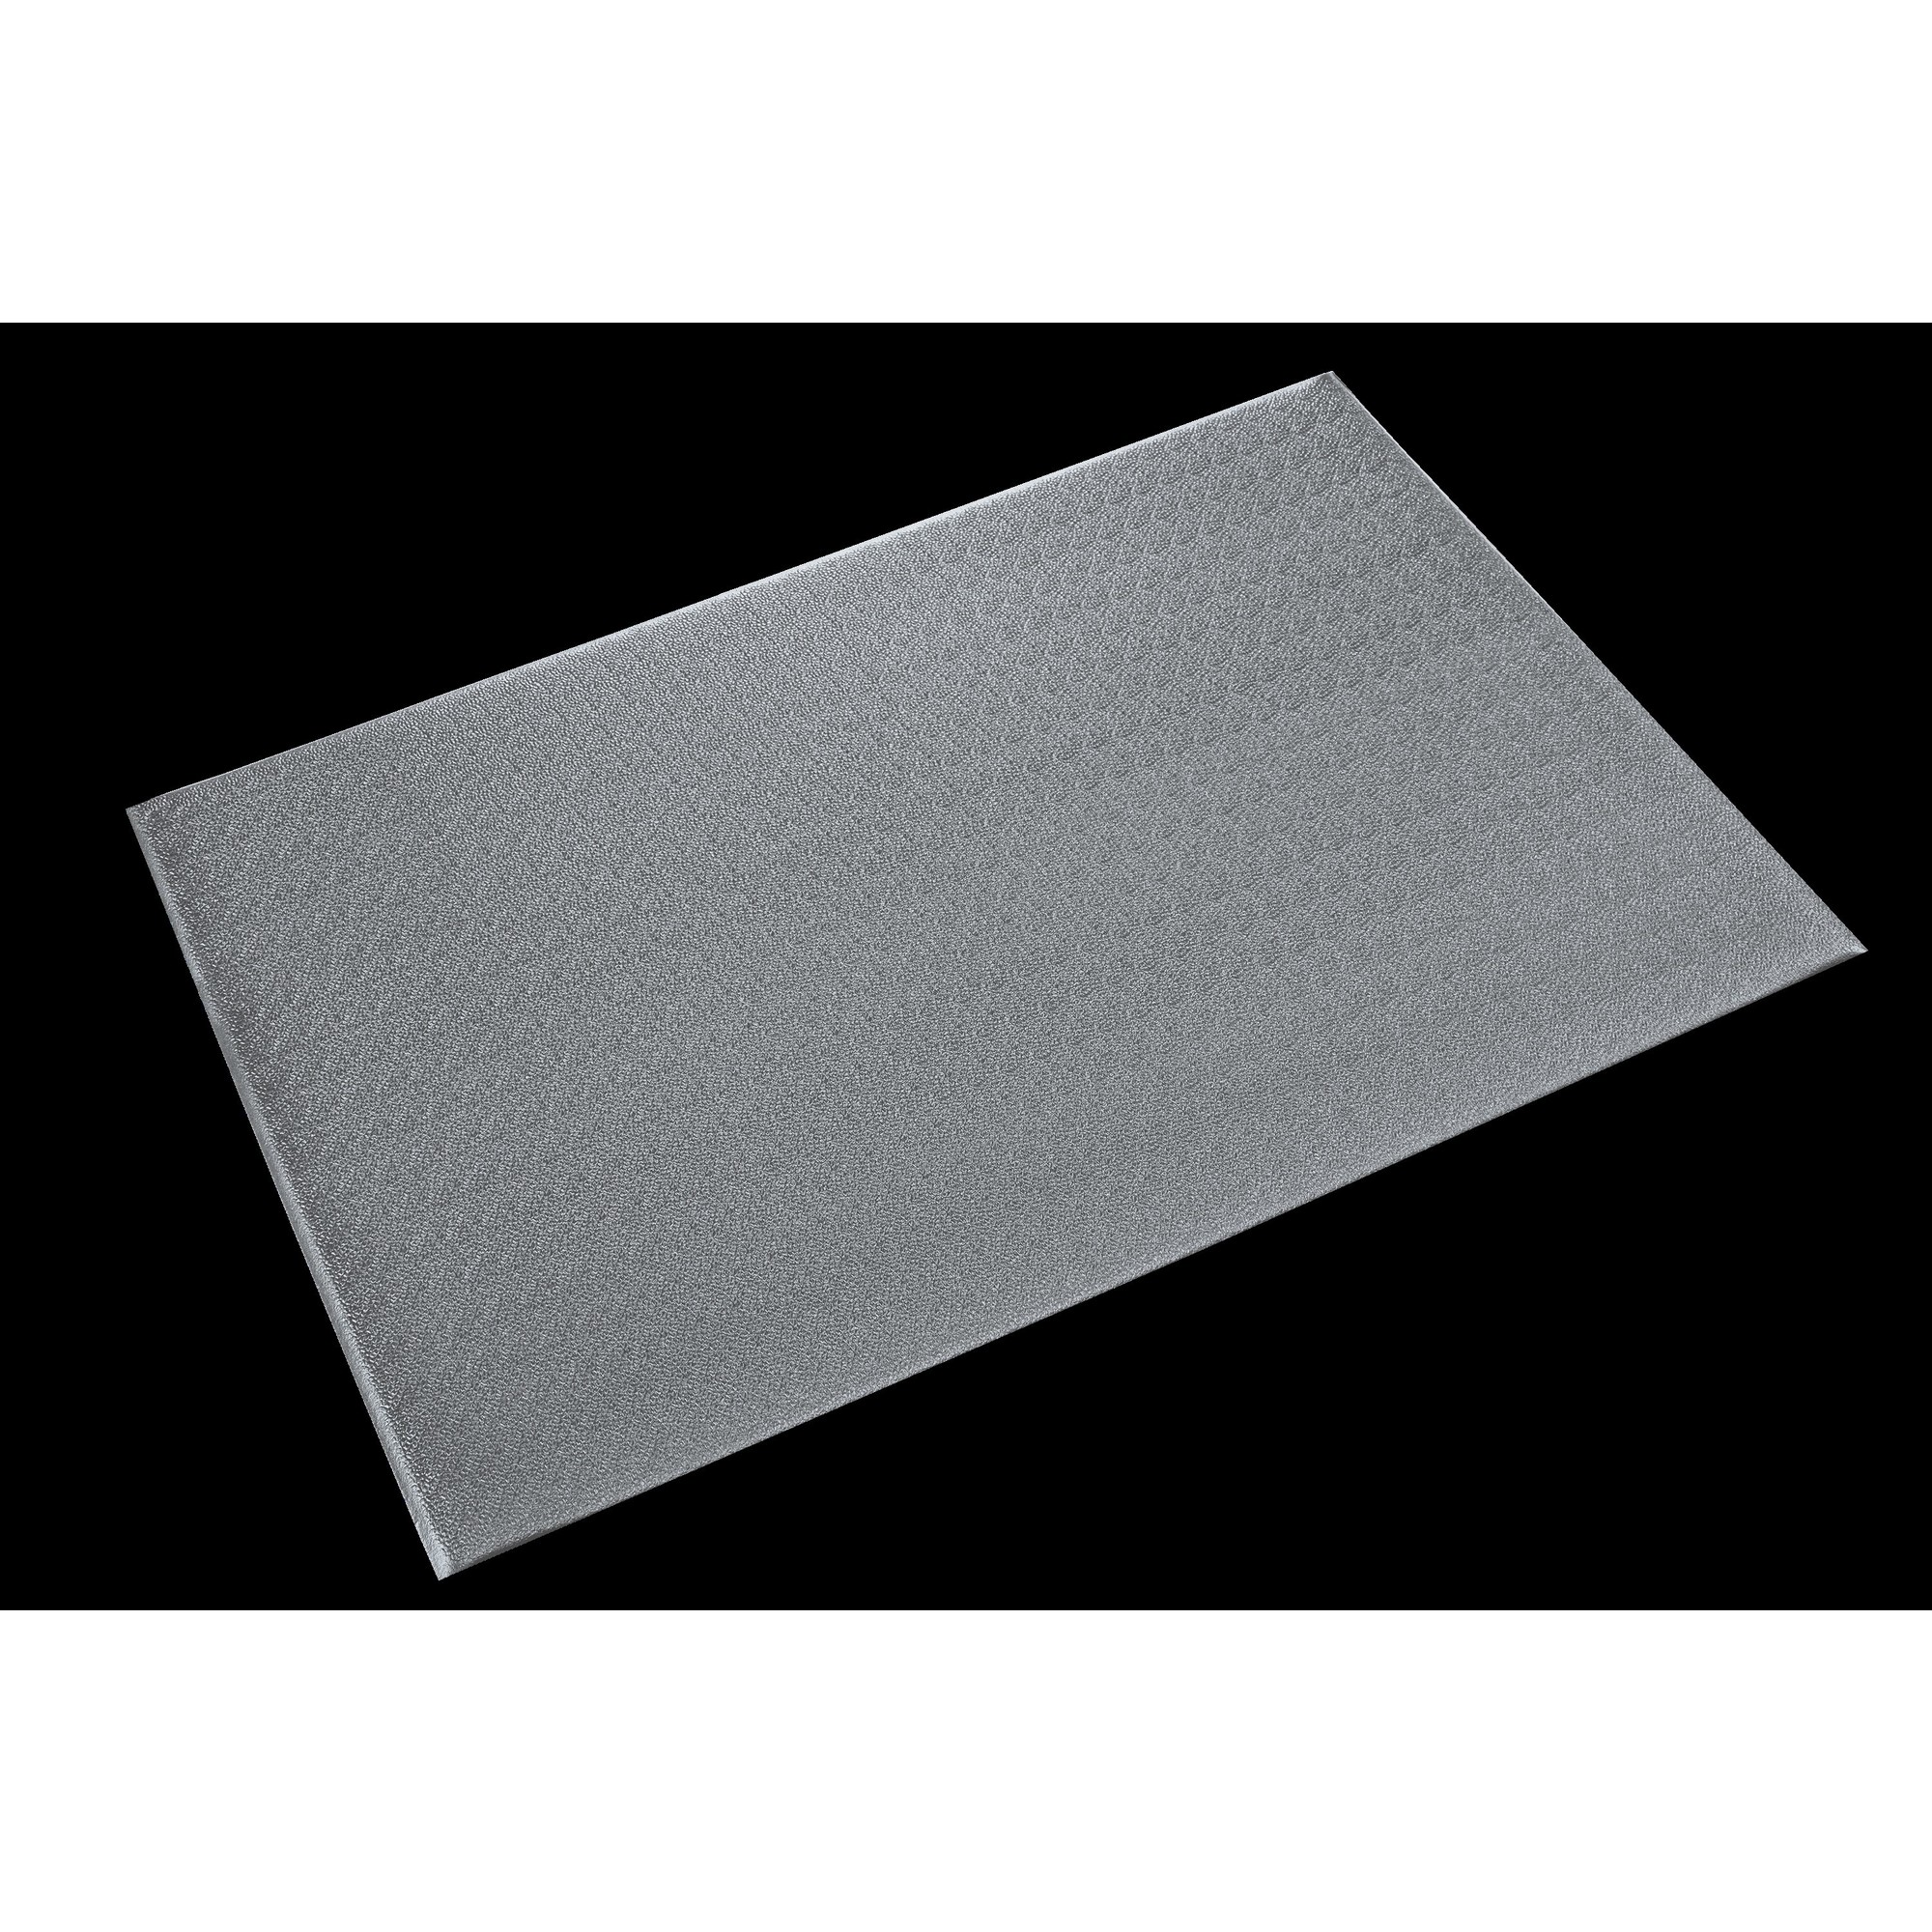 Crown Matting Technologies, Comfort-King 1/2 2ft.x3ft. Steel Gray, Width 24 in, Length 36 in, Thickness 1/2 in, Model K4 0023GY